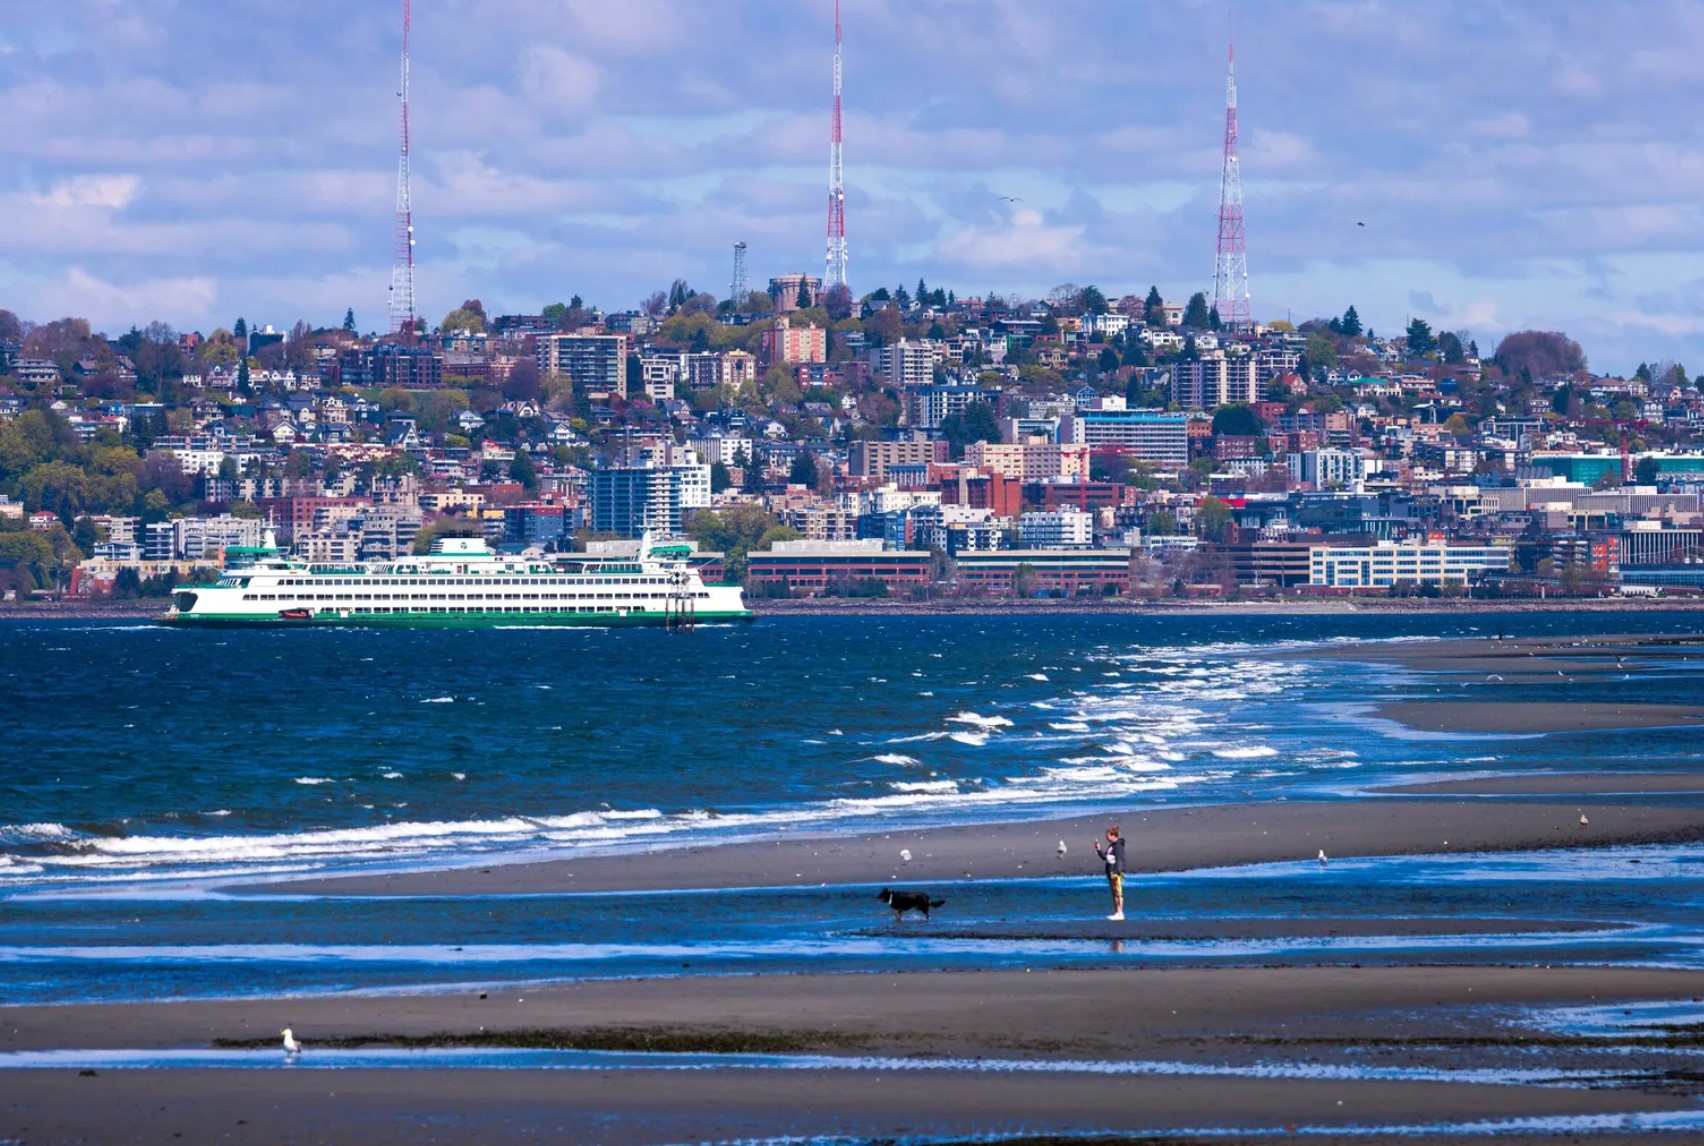 The Washington State Ferries crew and ferry riders care deeply about improving the system, writes the author. Pictured is a ferry traveling through Elliott Bay during low tide at Alki Beach in Seattle. (Erika Schultz / The Seattle Times)